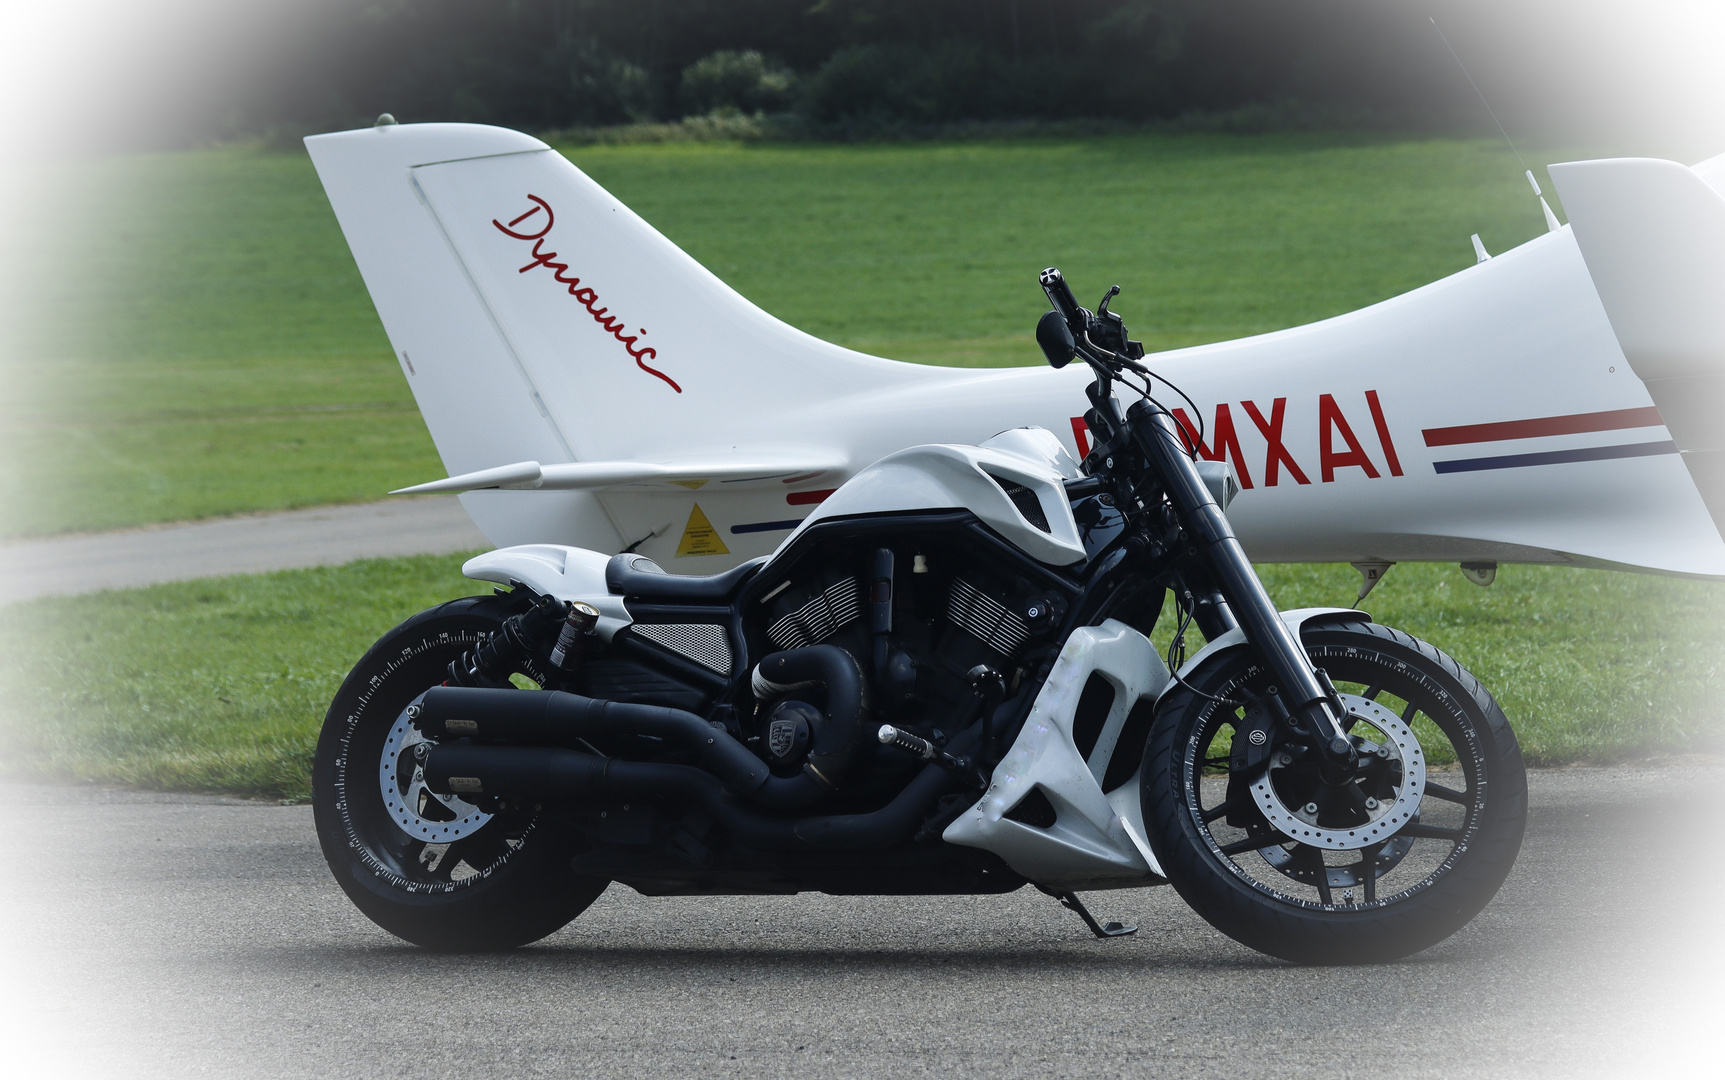 motorcycle meets airplane